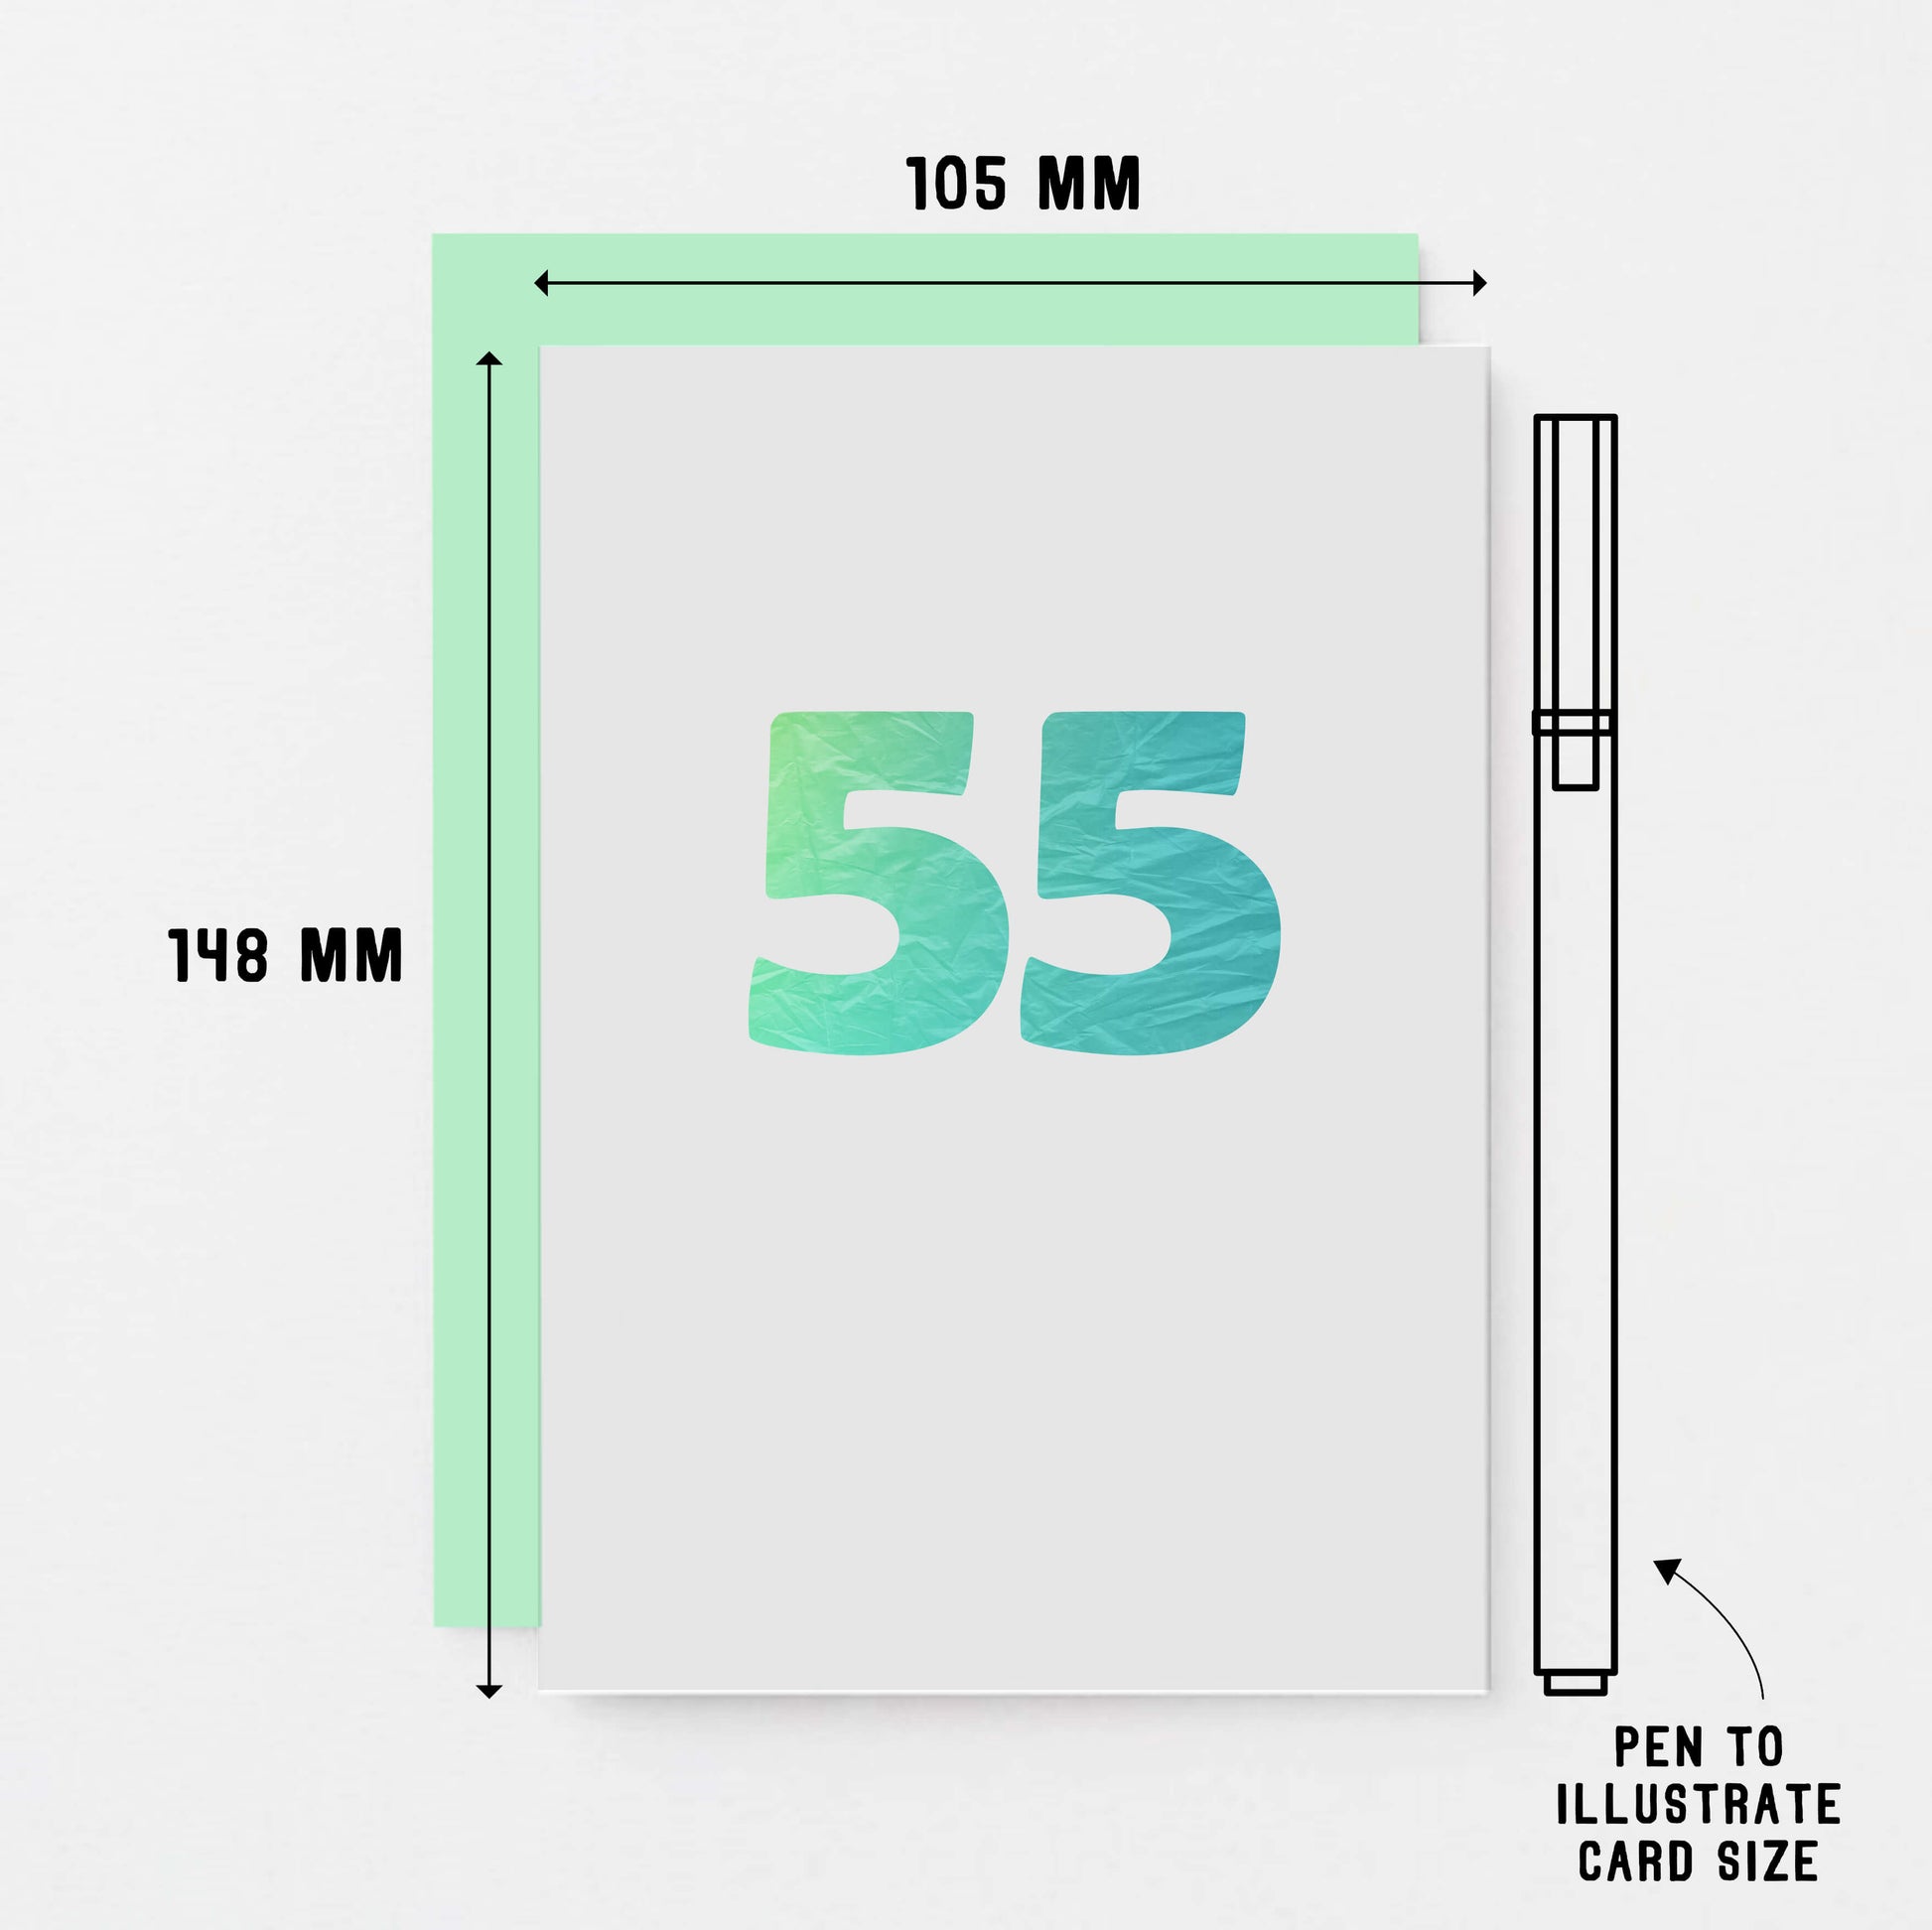 55 Years Card by SixElevenCreations. Product Code SE4057A6